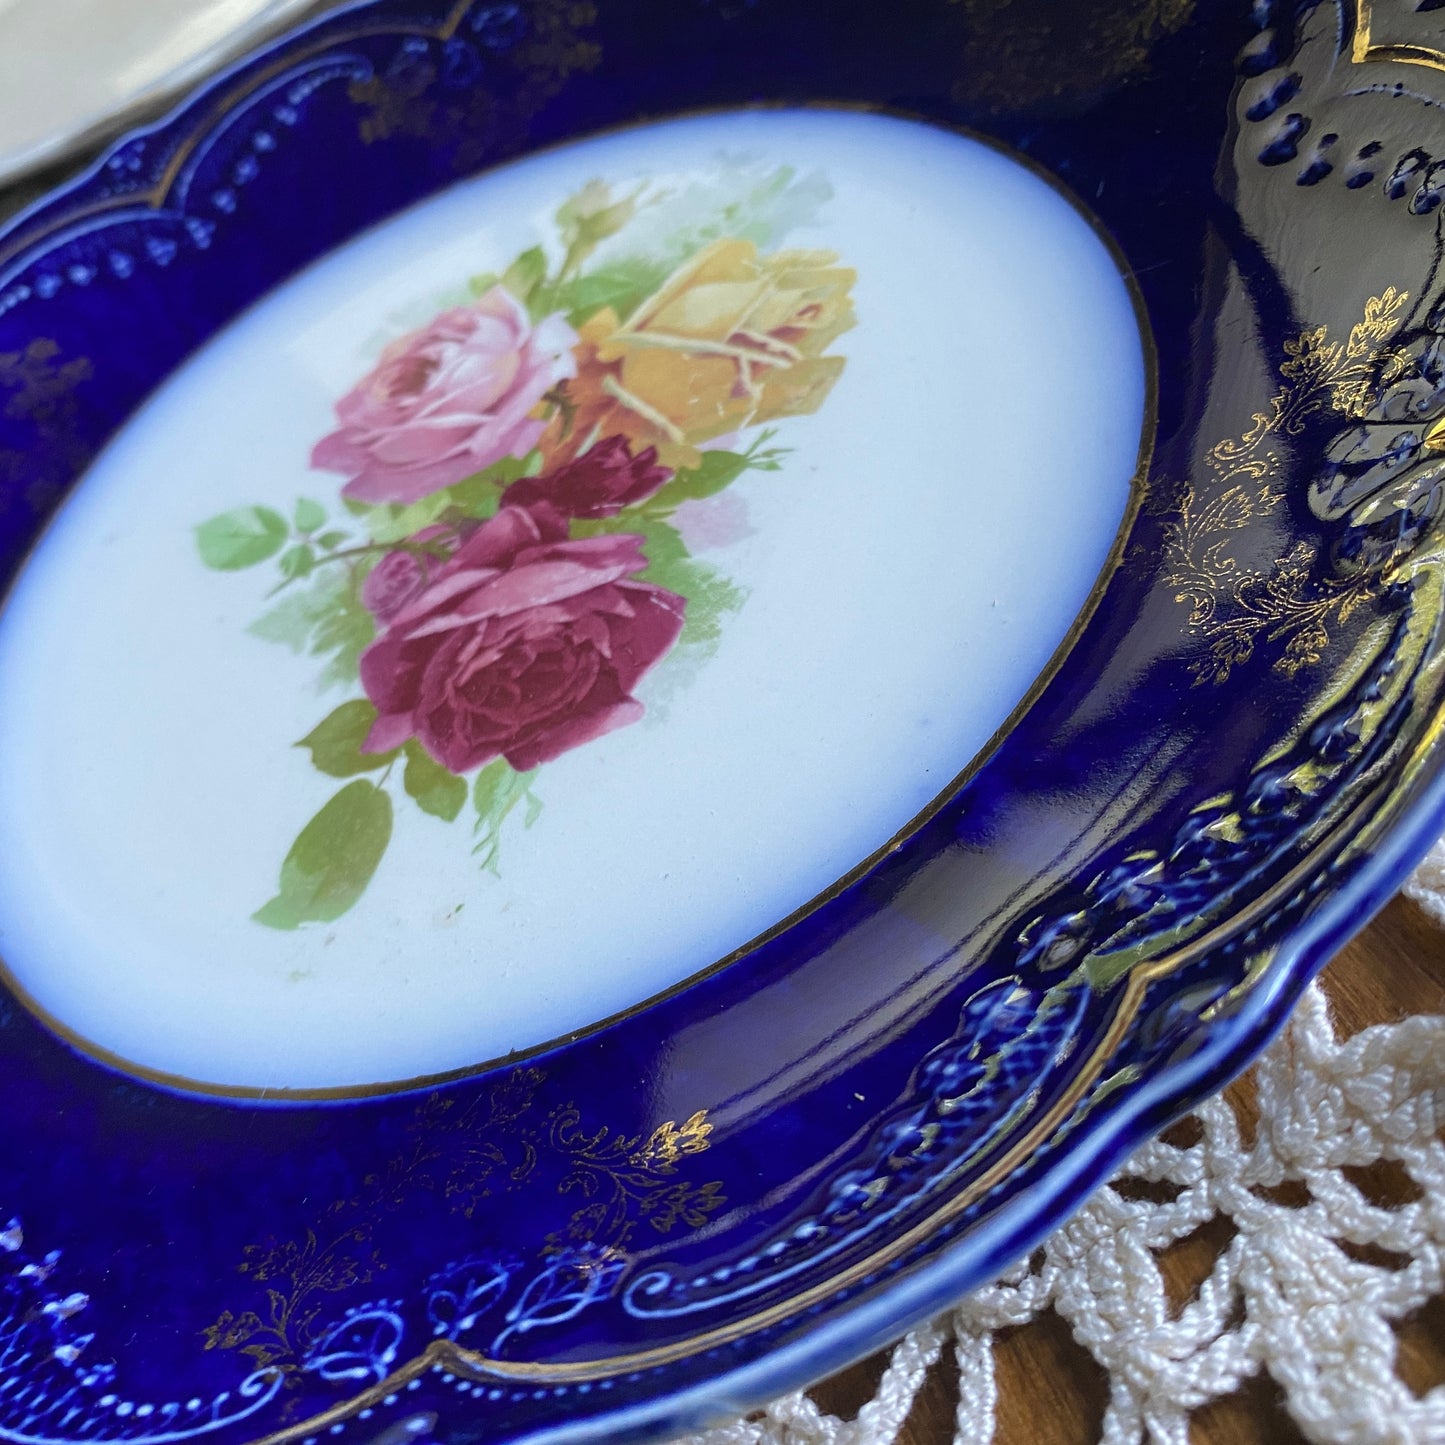 Flow Blue Plate by Wood & Son, Trent Pattern